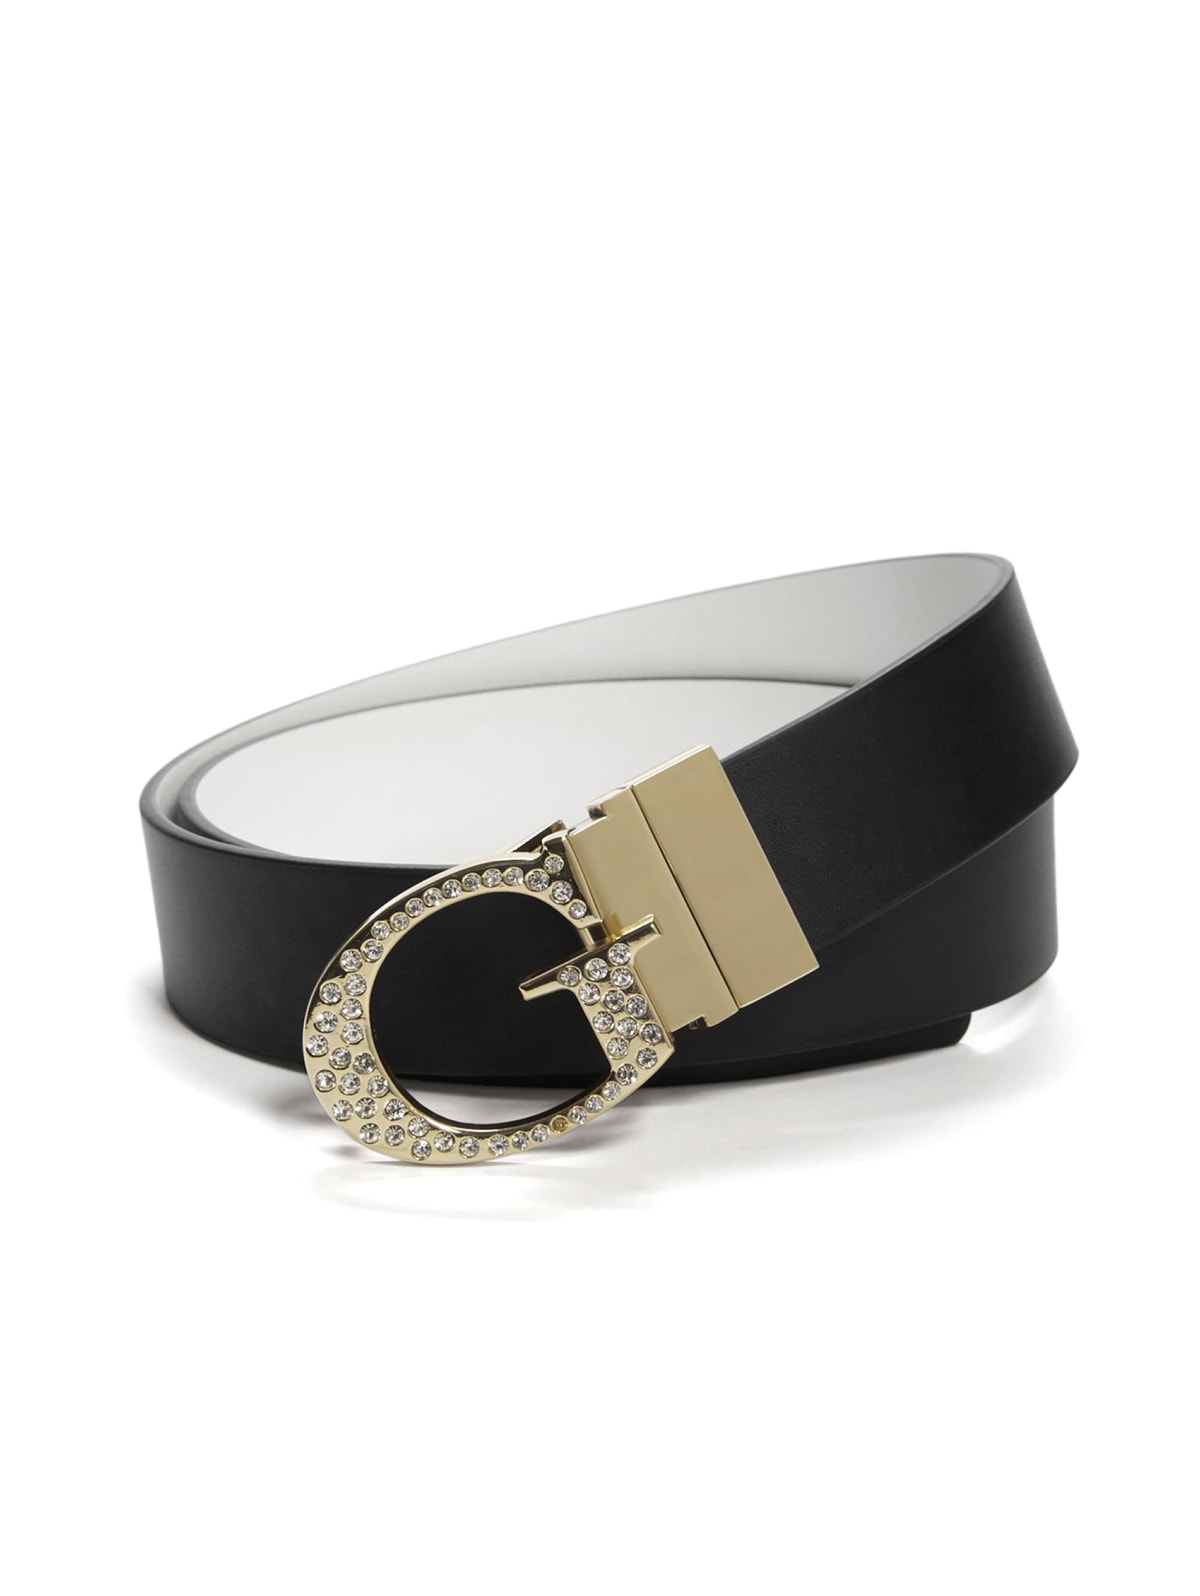 g by guess belt